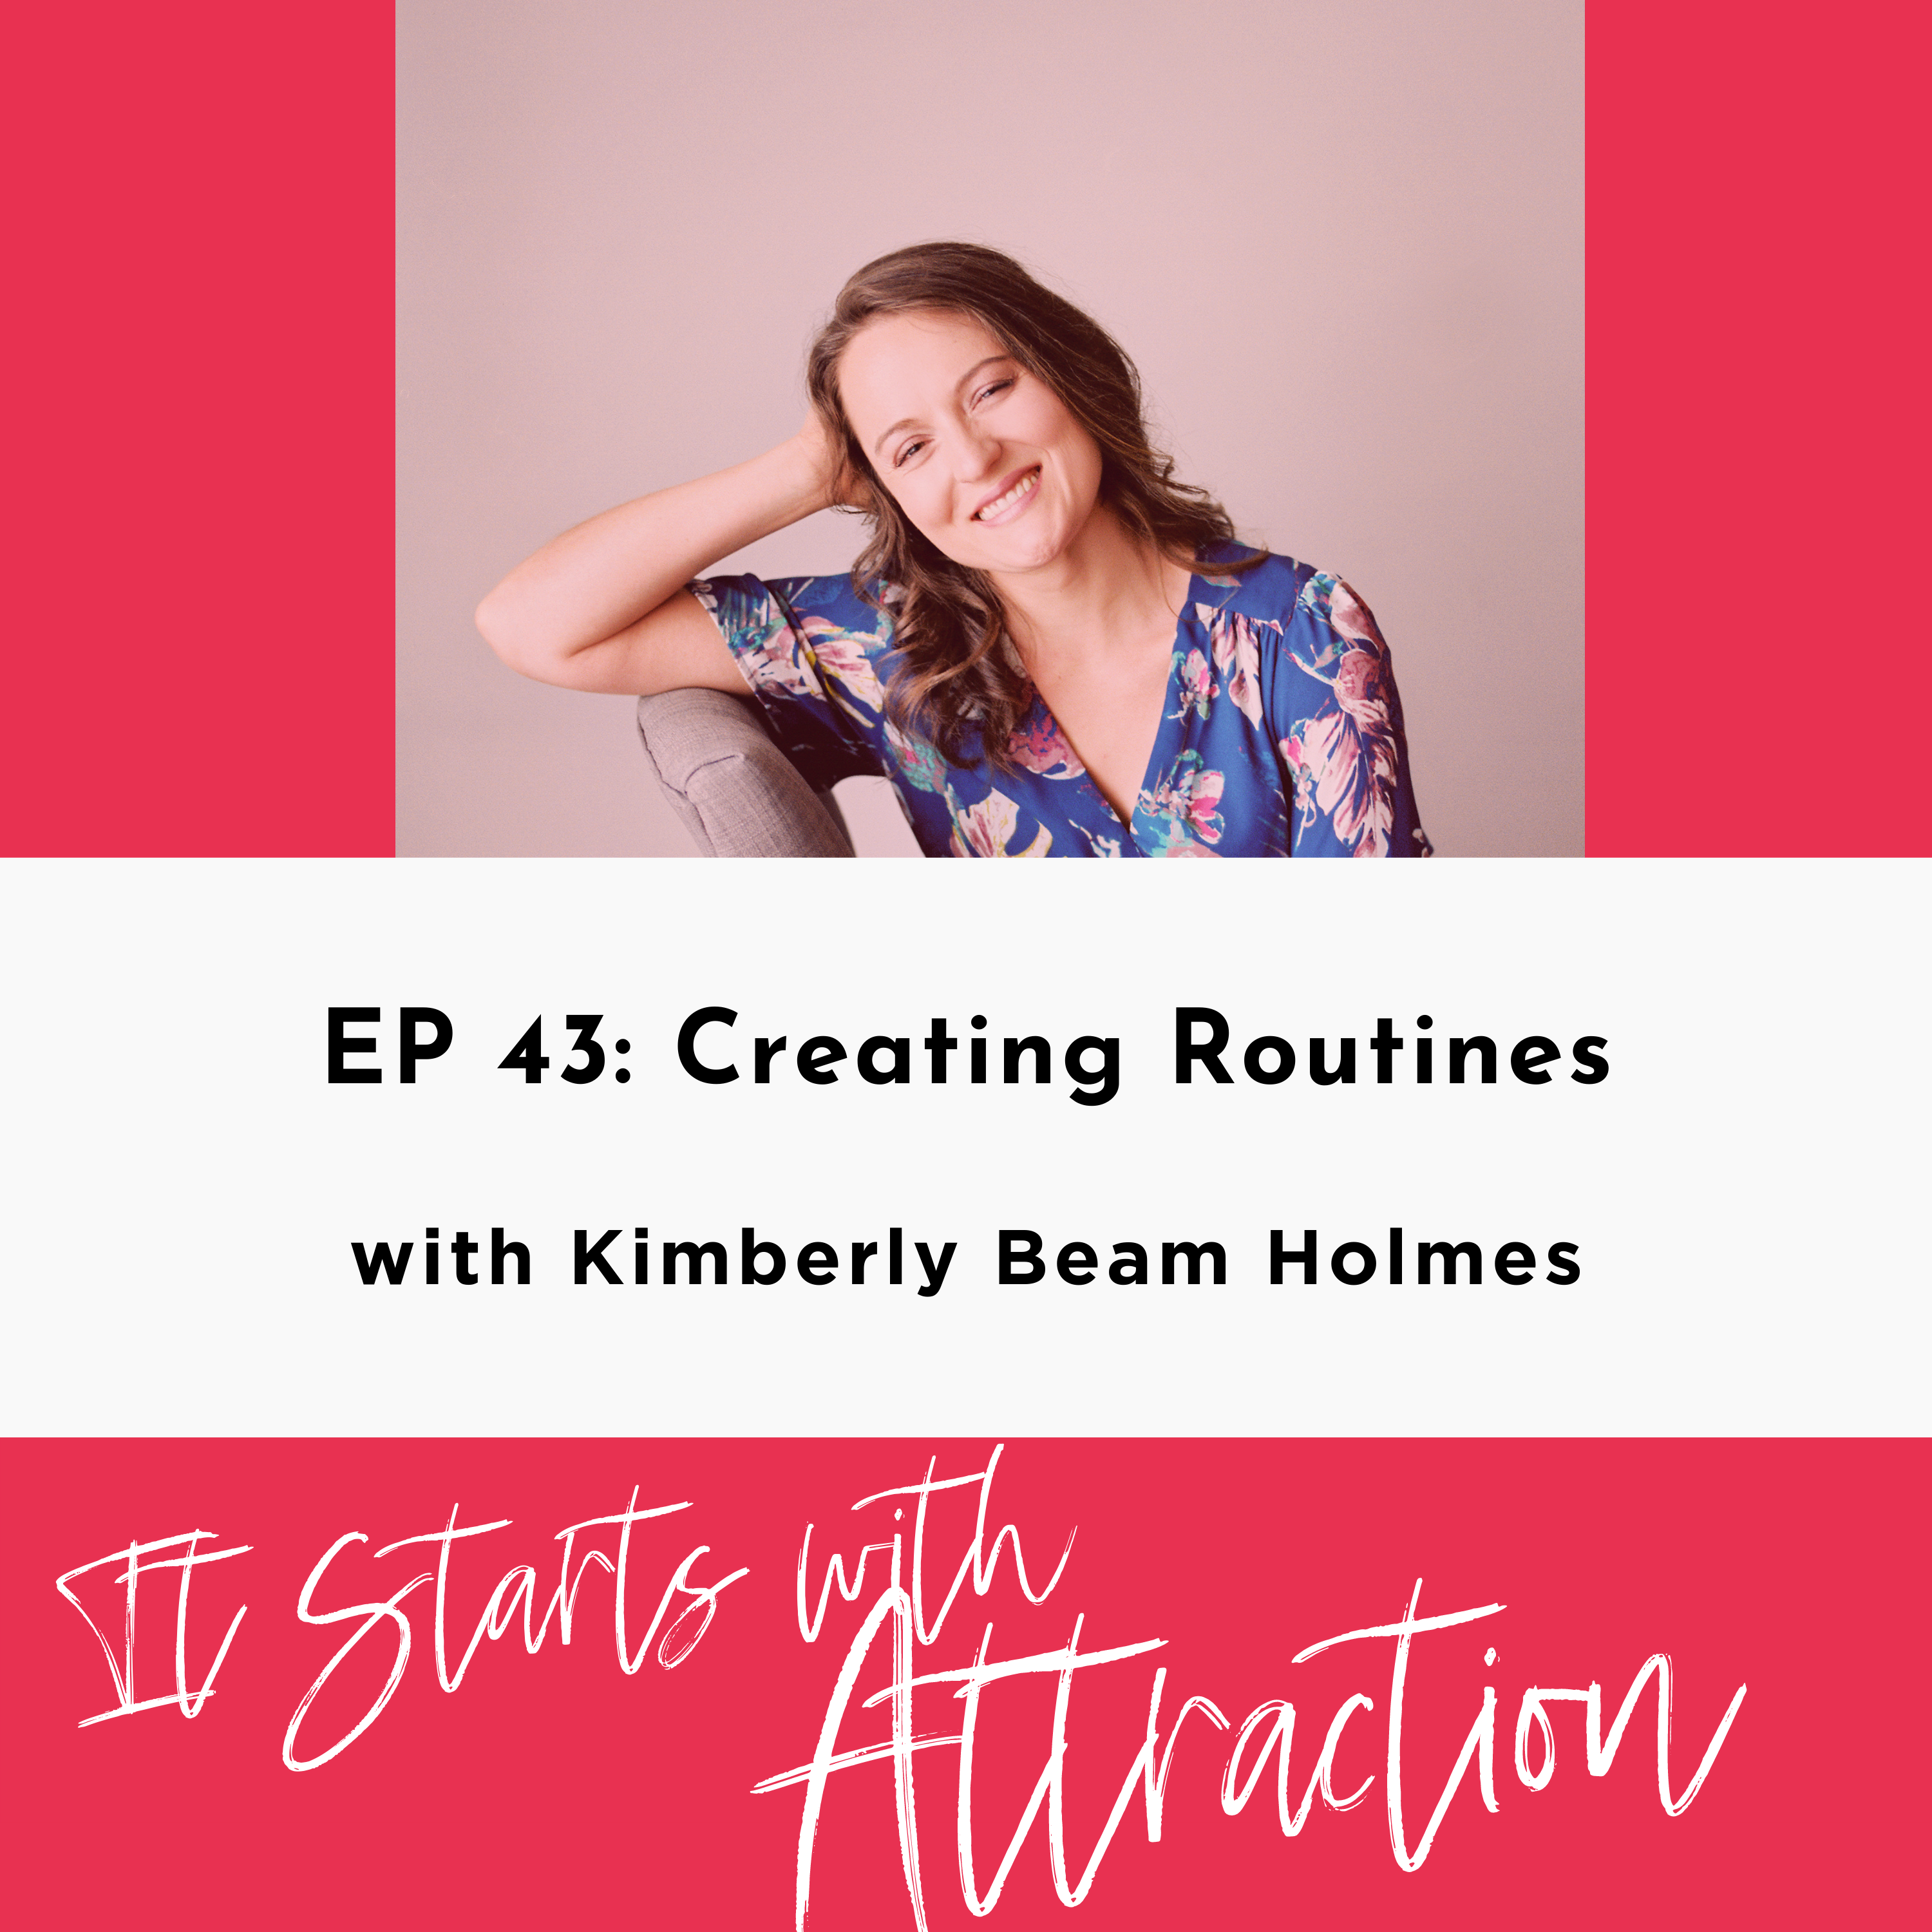 Creating Routines with Kimberly Beam Holmes